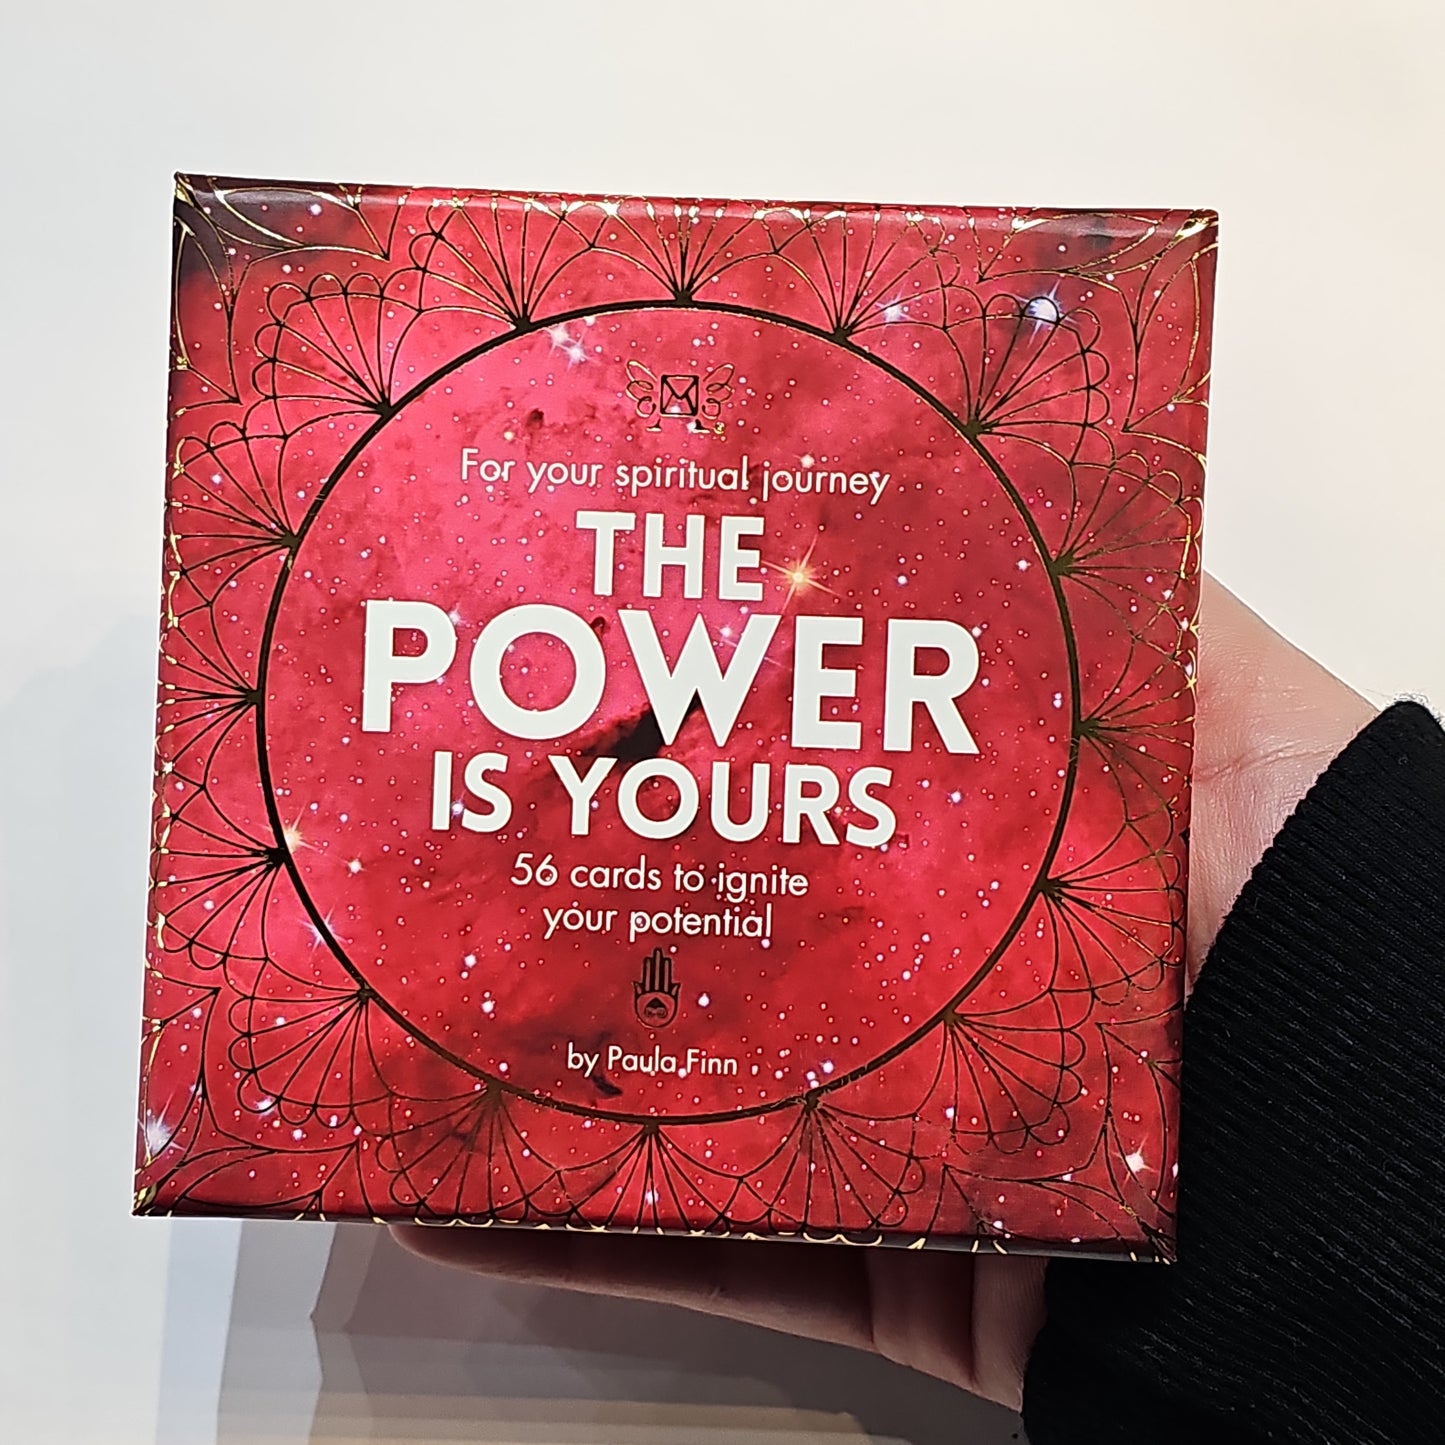 The power is yours affirmation cards - Rivendell Shop